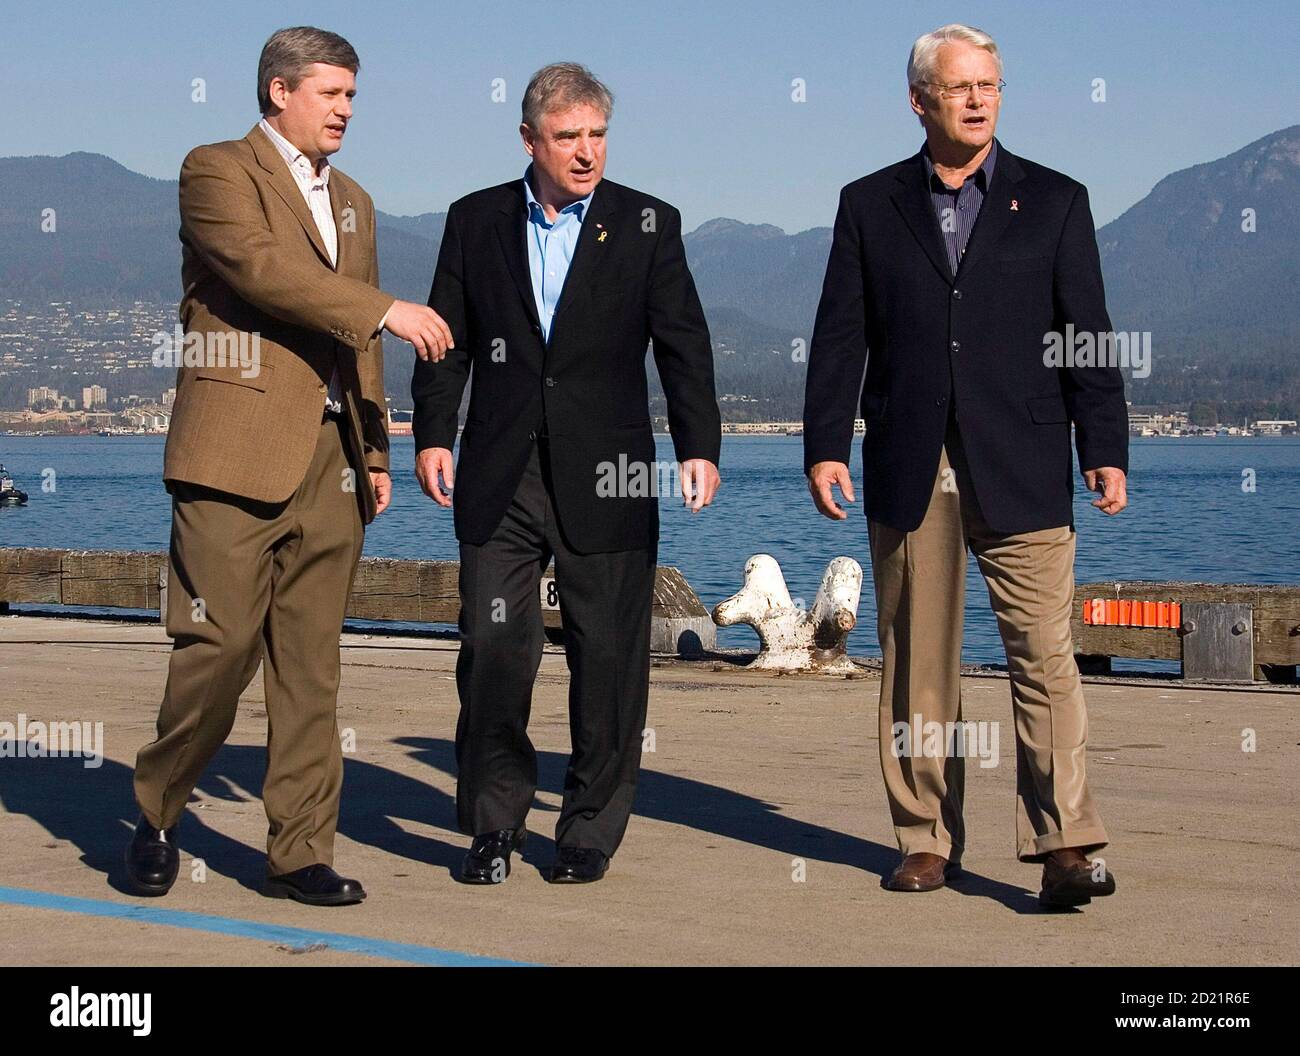 Canadian Prime Minister Stephen Harper (L), British Columbia Premier Gordon Campbell (R) and International Trade Minister David Emerson walk along the Balantyne Pier in Vancouver, British Columbia, October 11, 2006. Canada will pump almost C$600 million ($531 million) into upgrading ports, roads and railways on its West Coast in an attempt to clinch a bigger share of the growing Pacific shipping market.        REUTERS/Jeff Vinnick (CANADA) Stock Photo